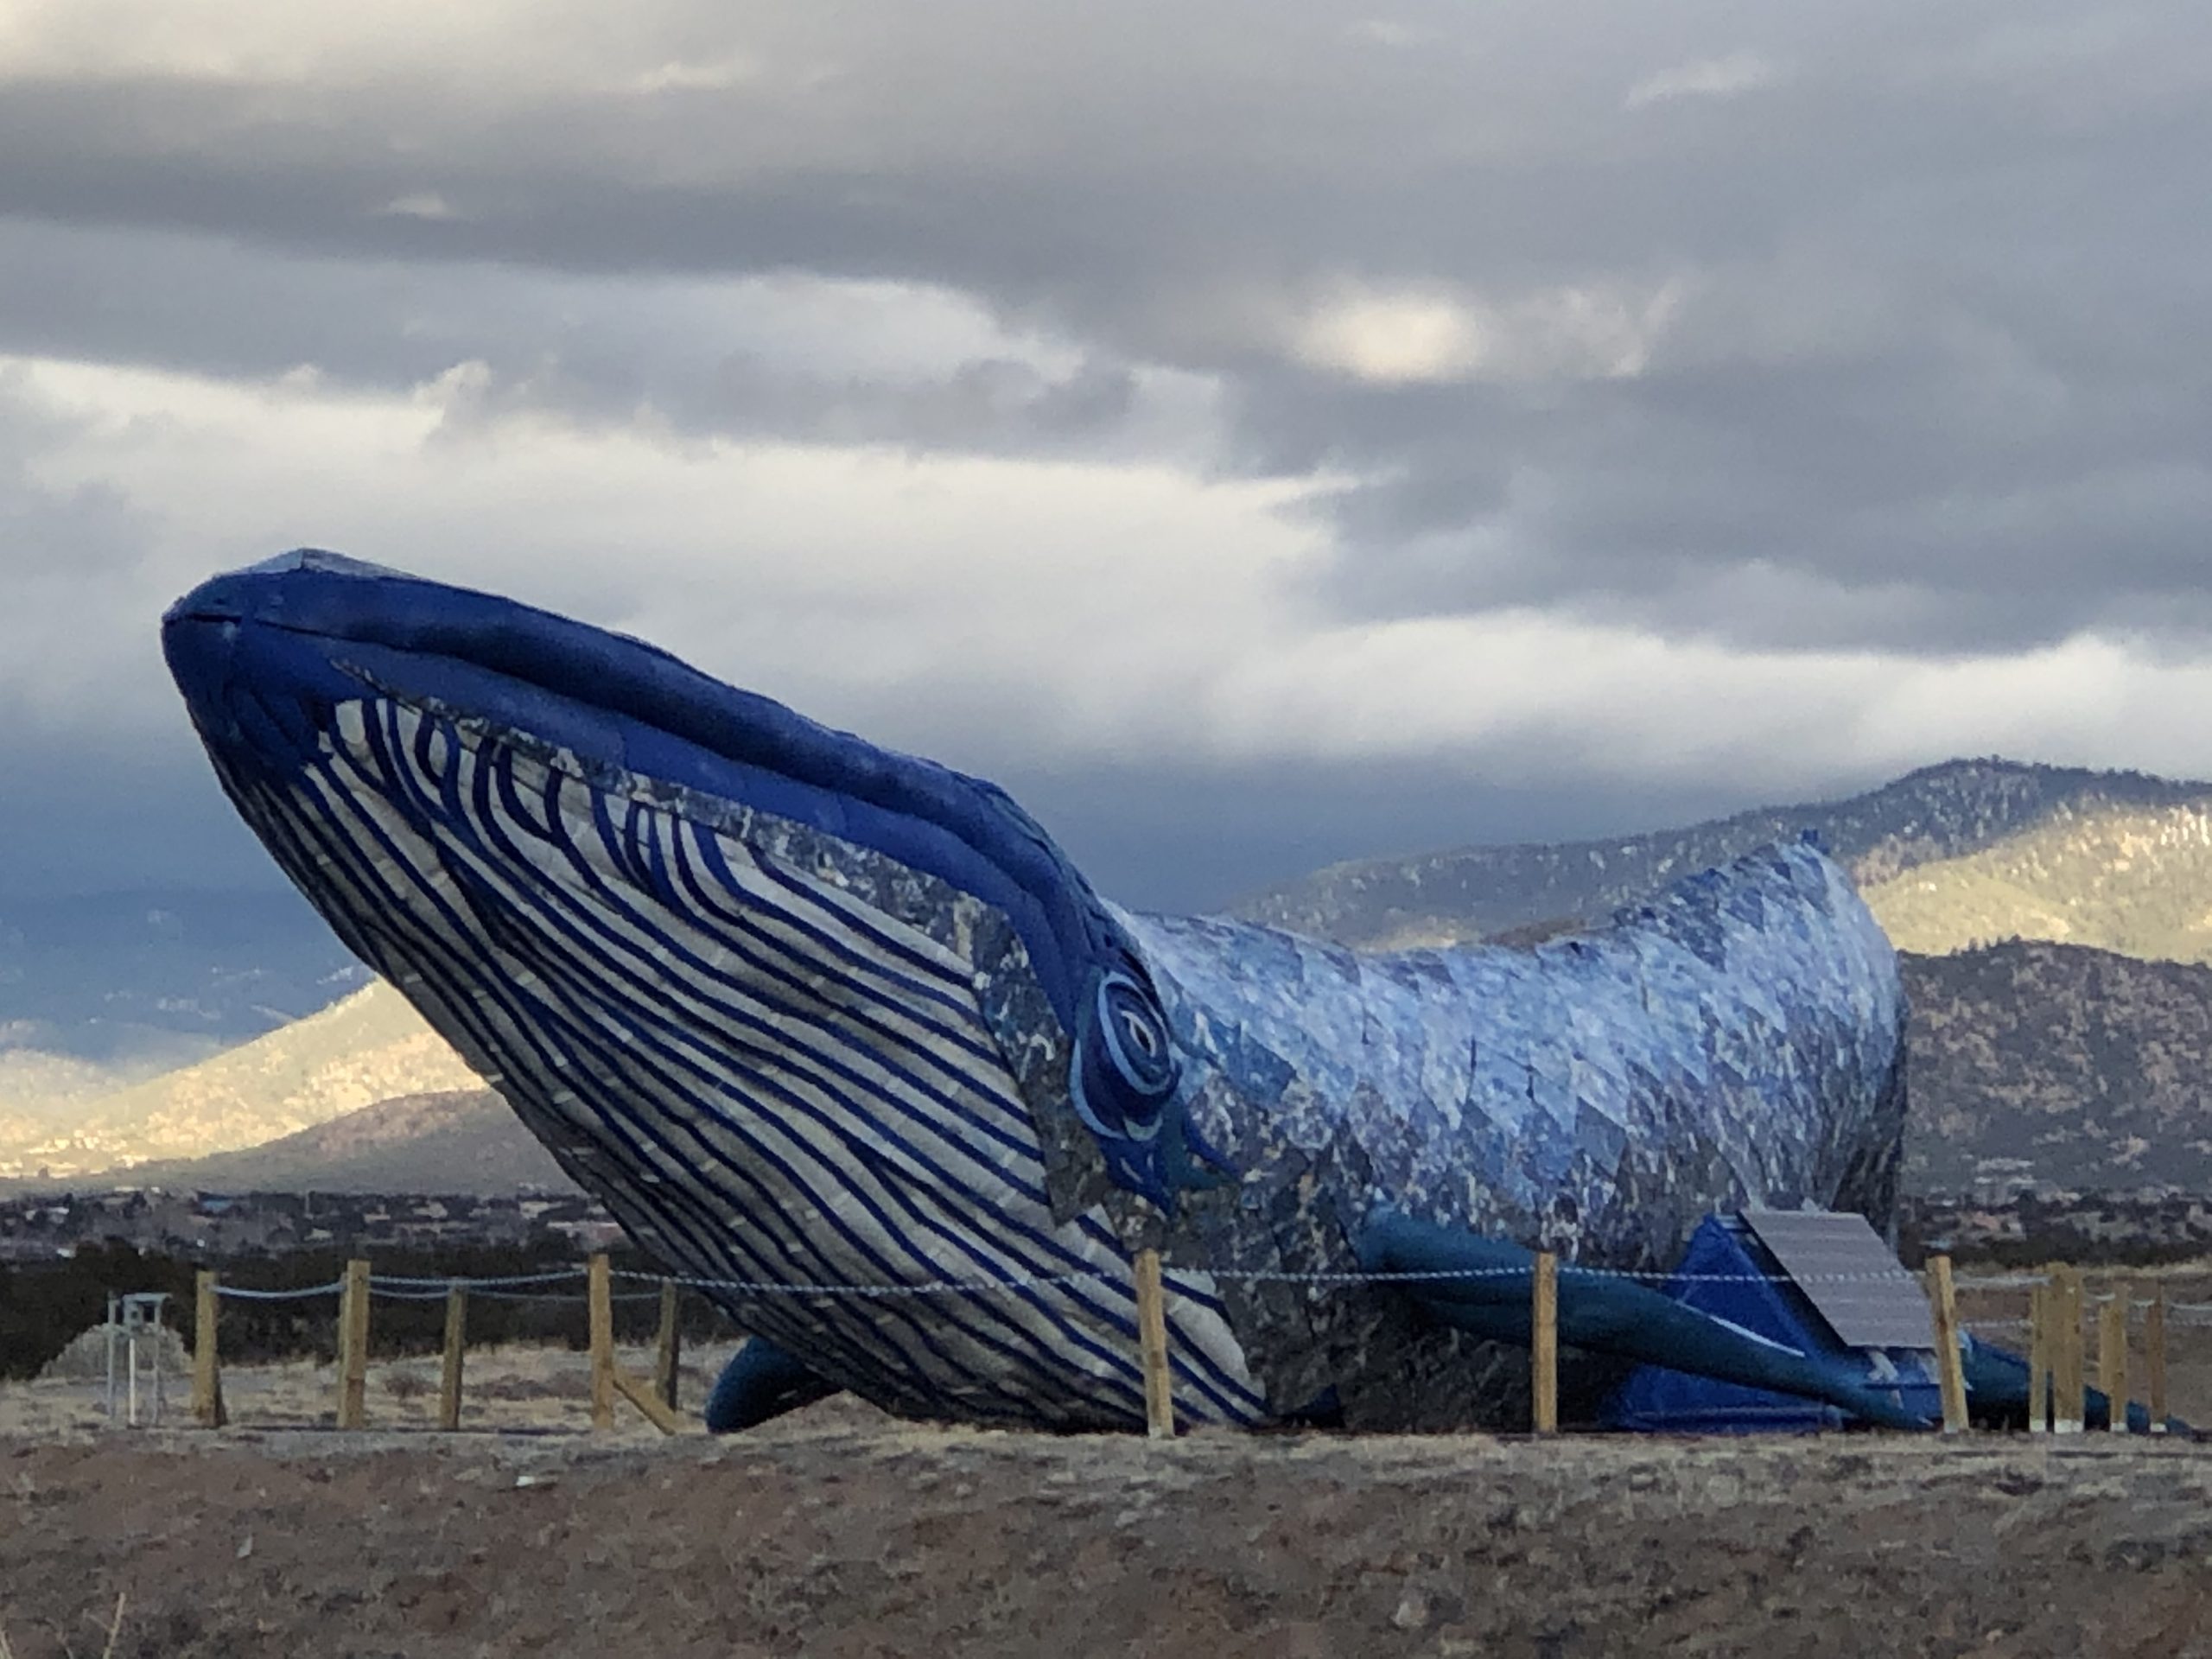 Whales in the Desert